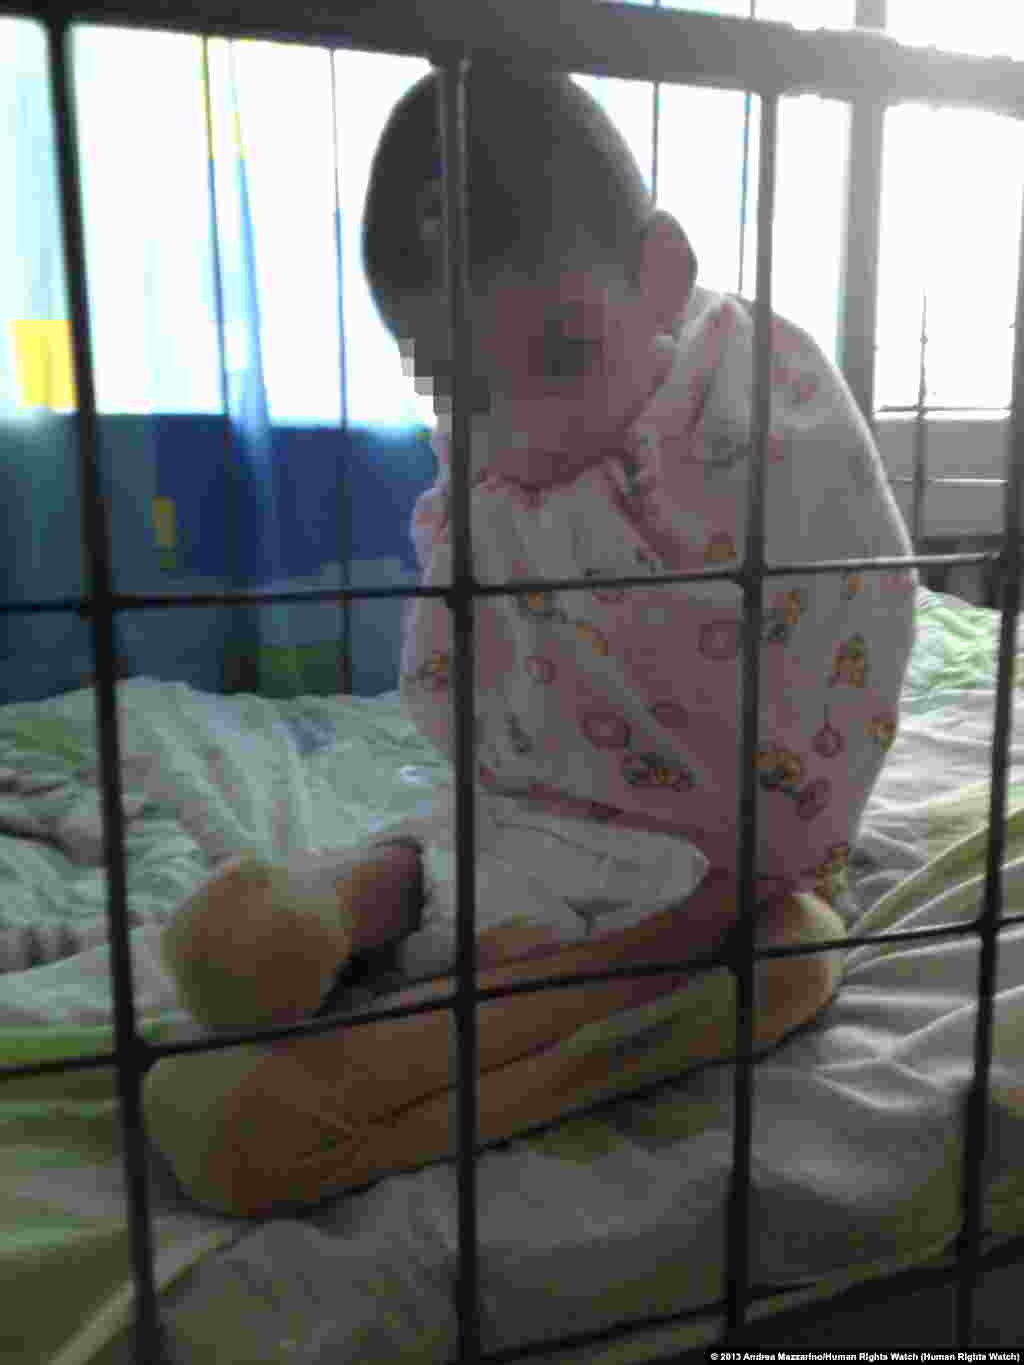 Nikita P., a 10-year-old boy, in his crib in a Sverdlovsk region orphanage for children with developmental disabilities.